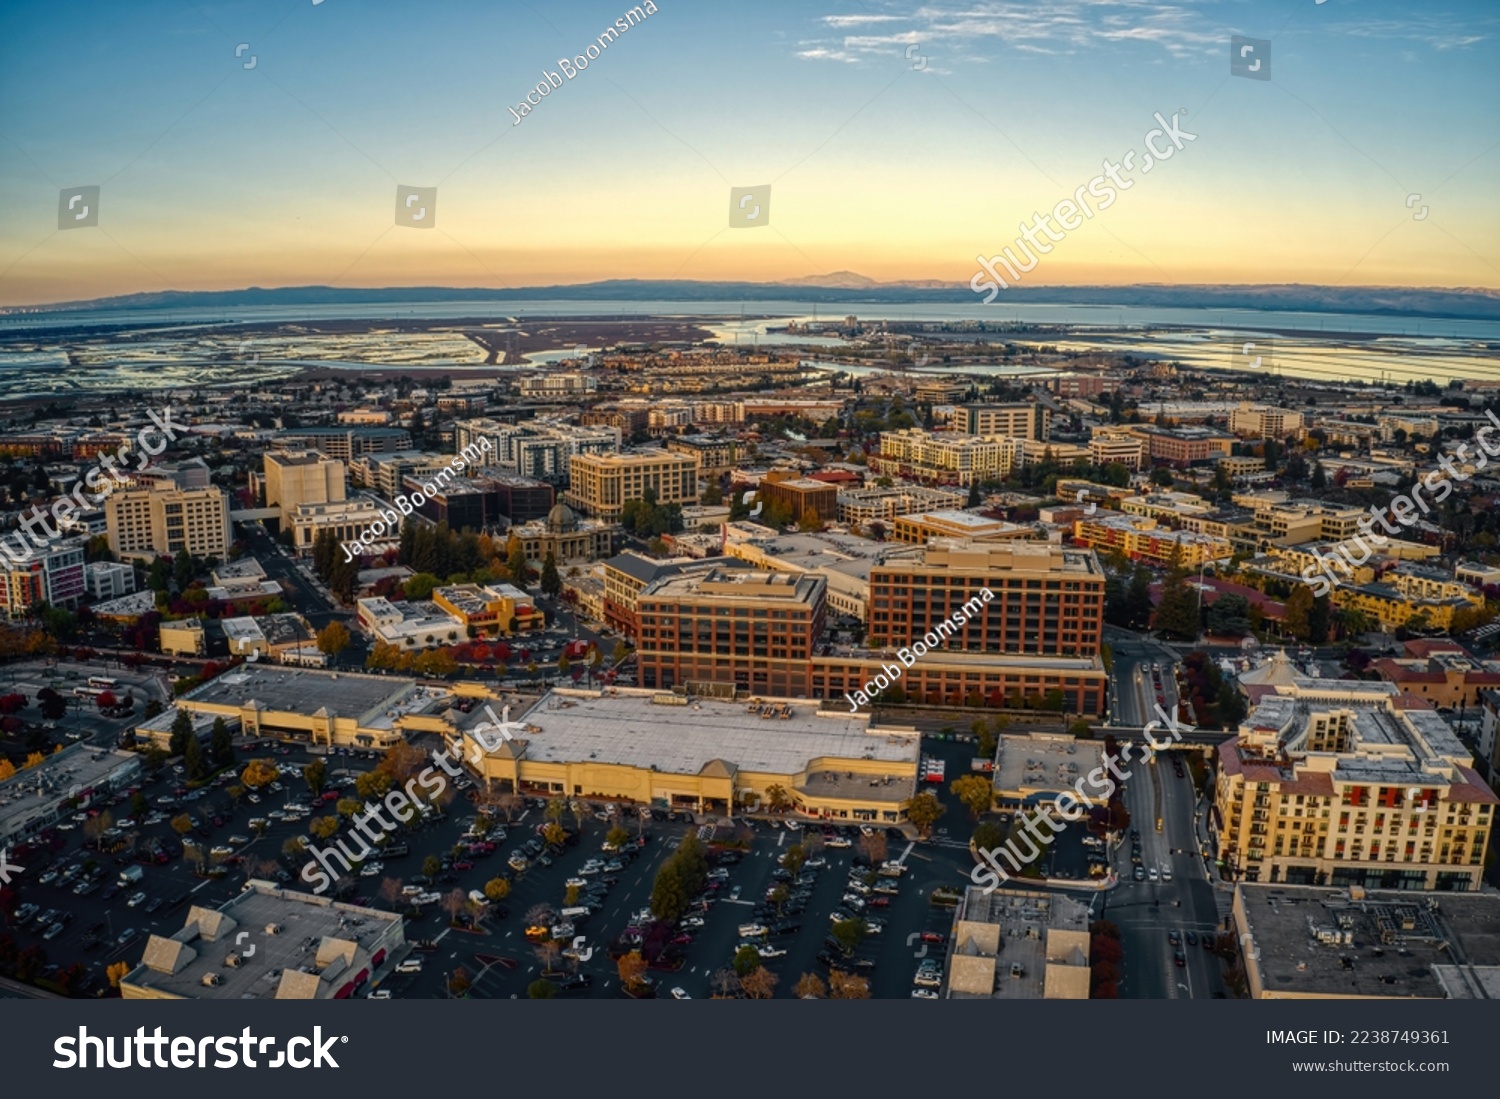 Aerial View of the Bay Area Suburb of Redwood City, California #2238749361